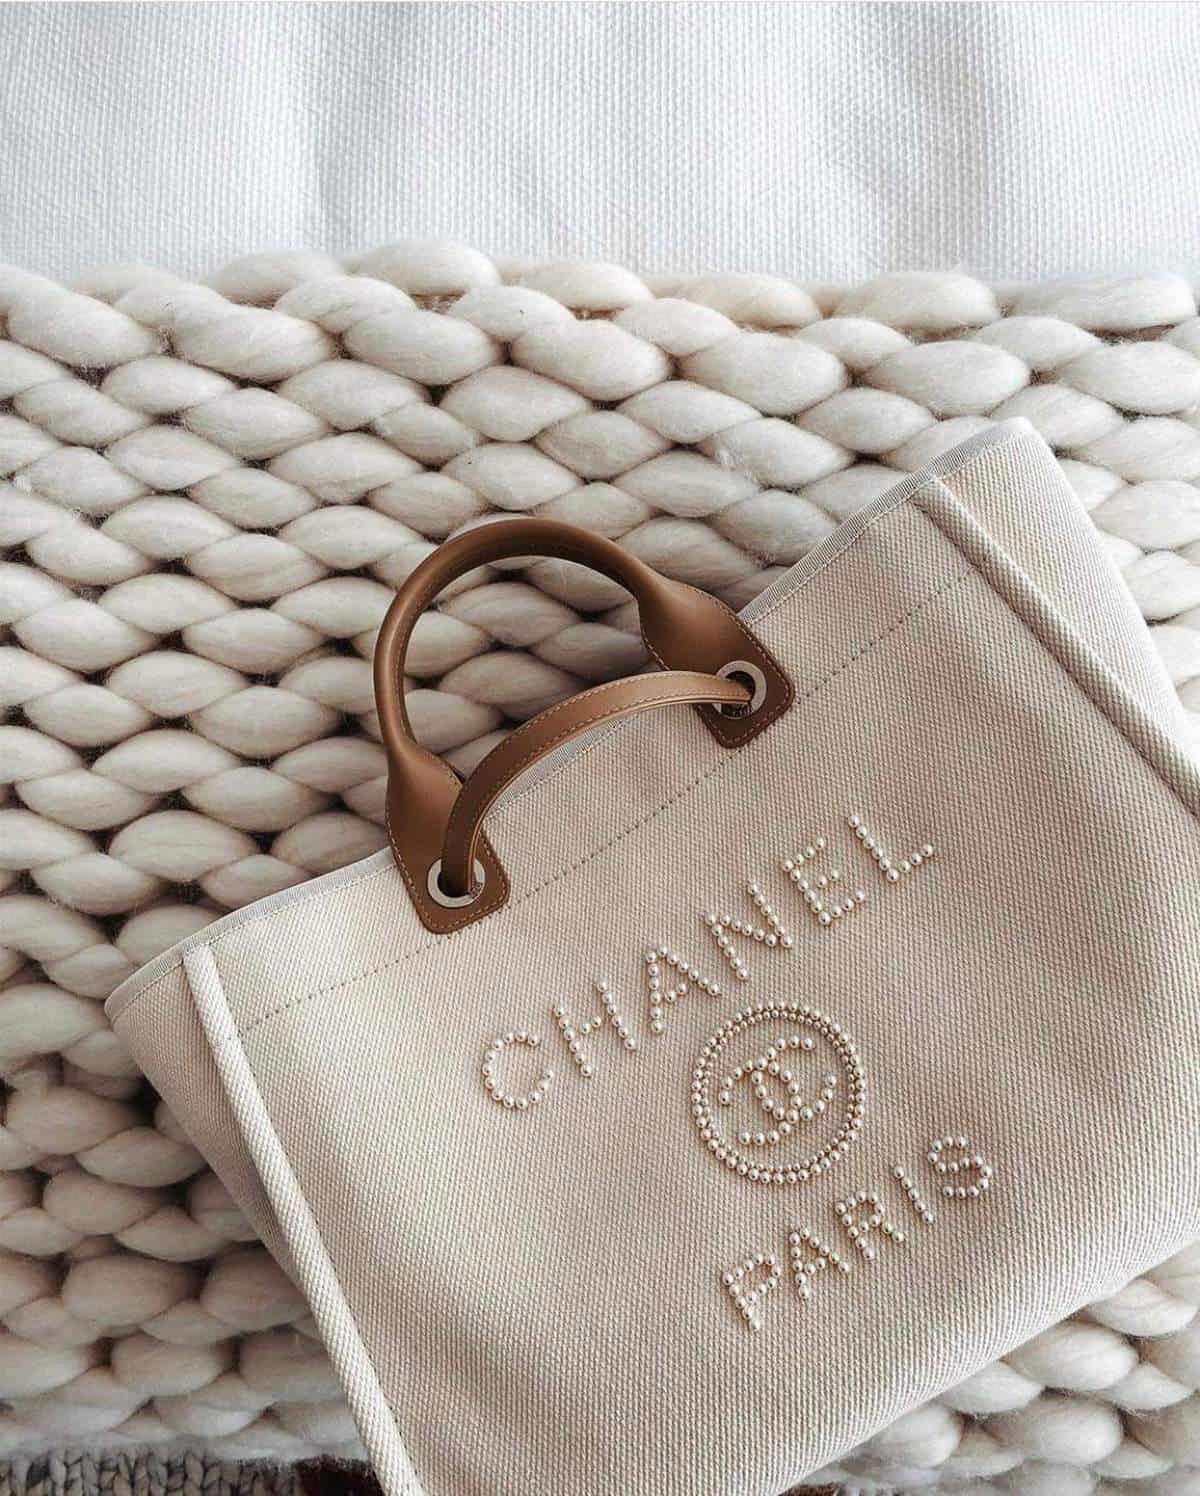 non leather chanel bag